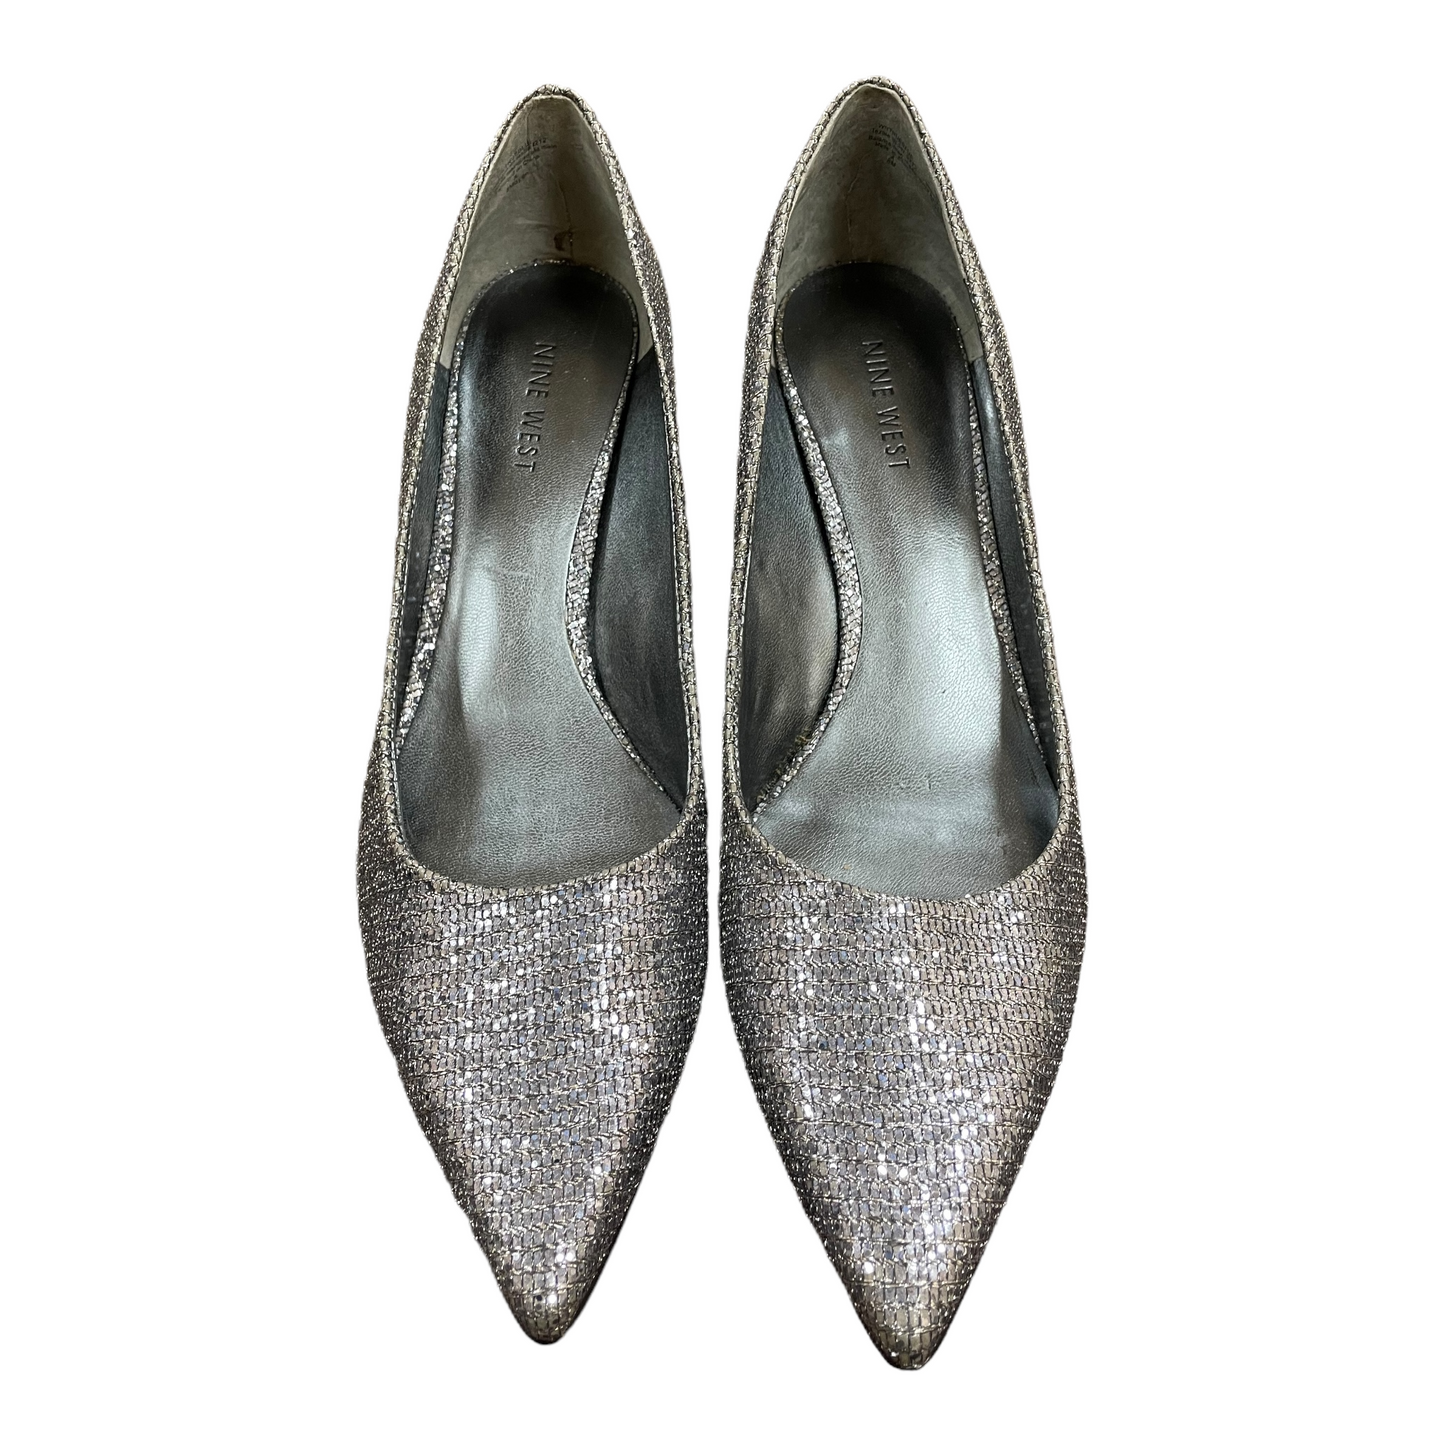 Silver Shoes Heels Stiletto By Nine West, Size: 8